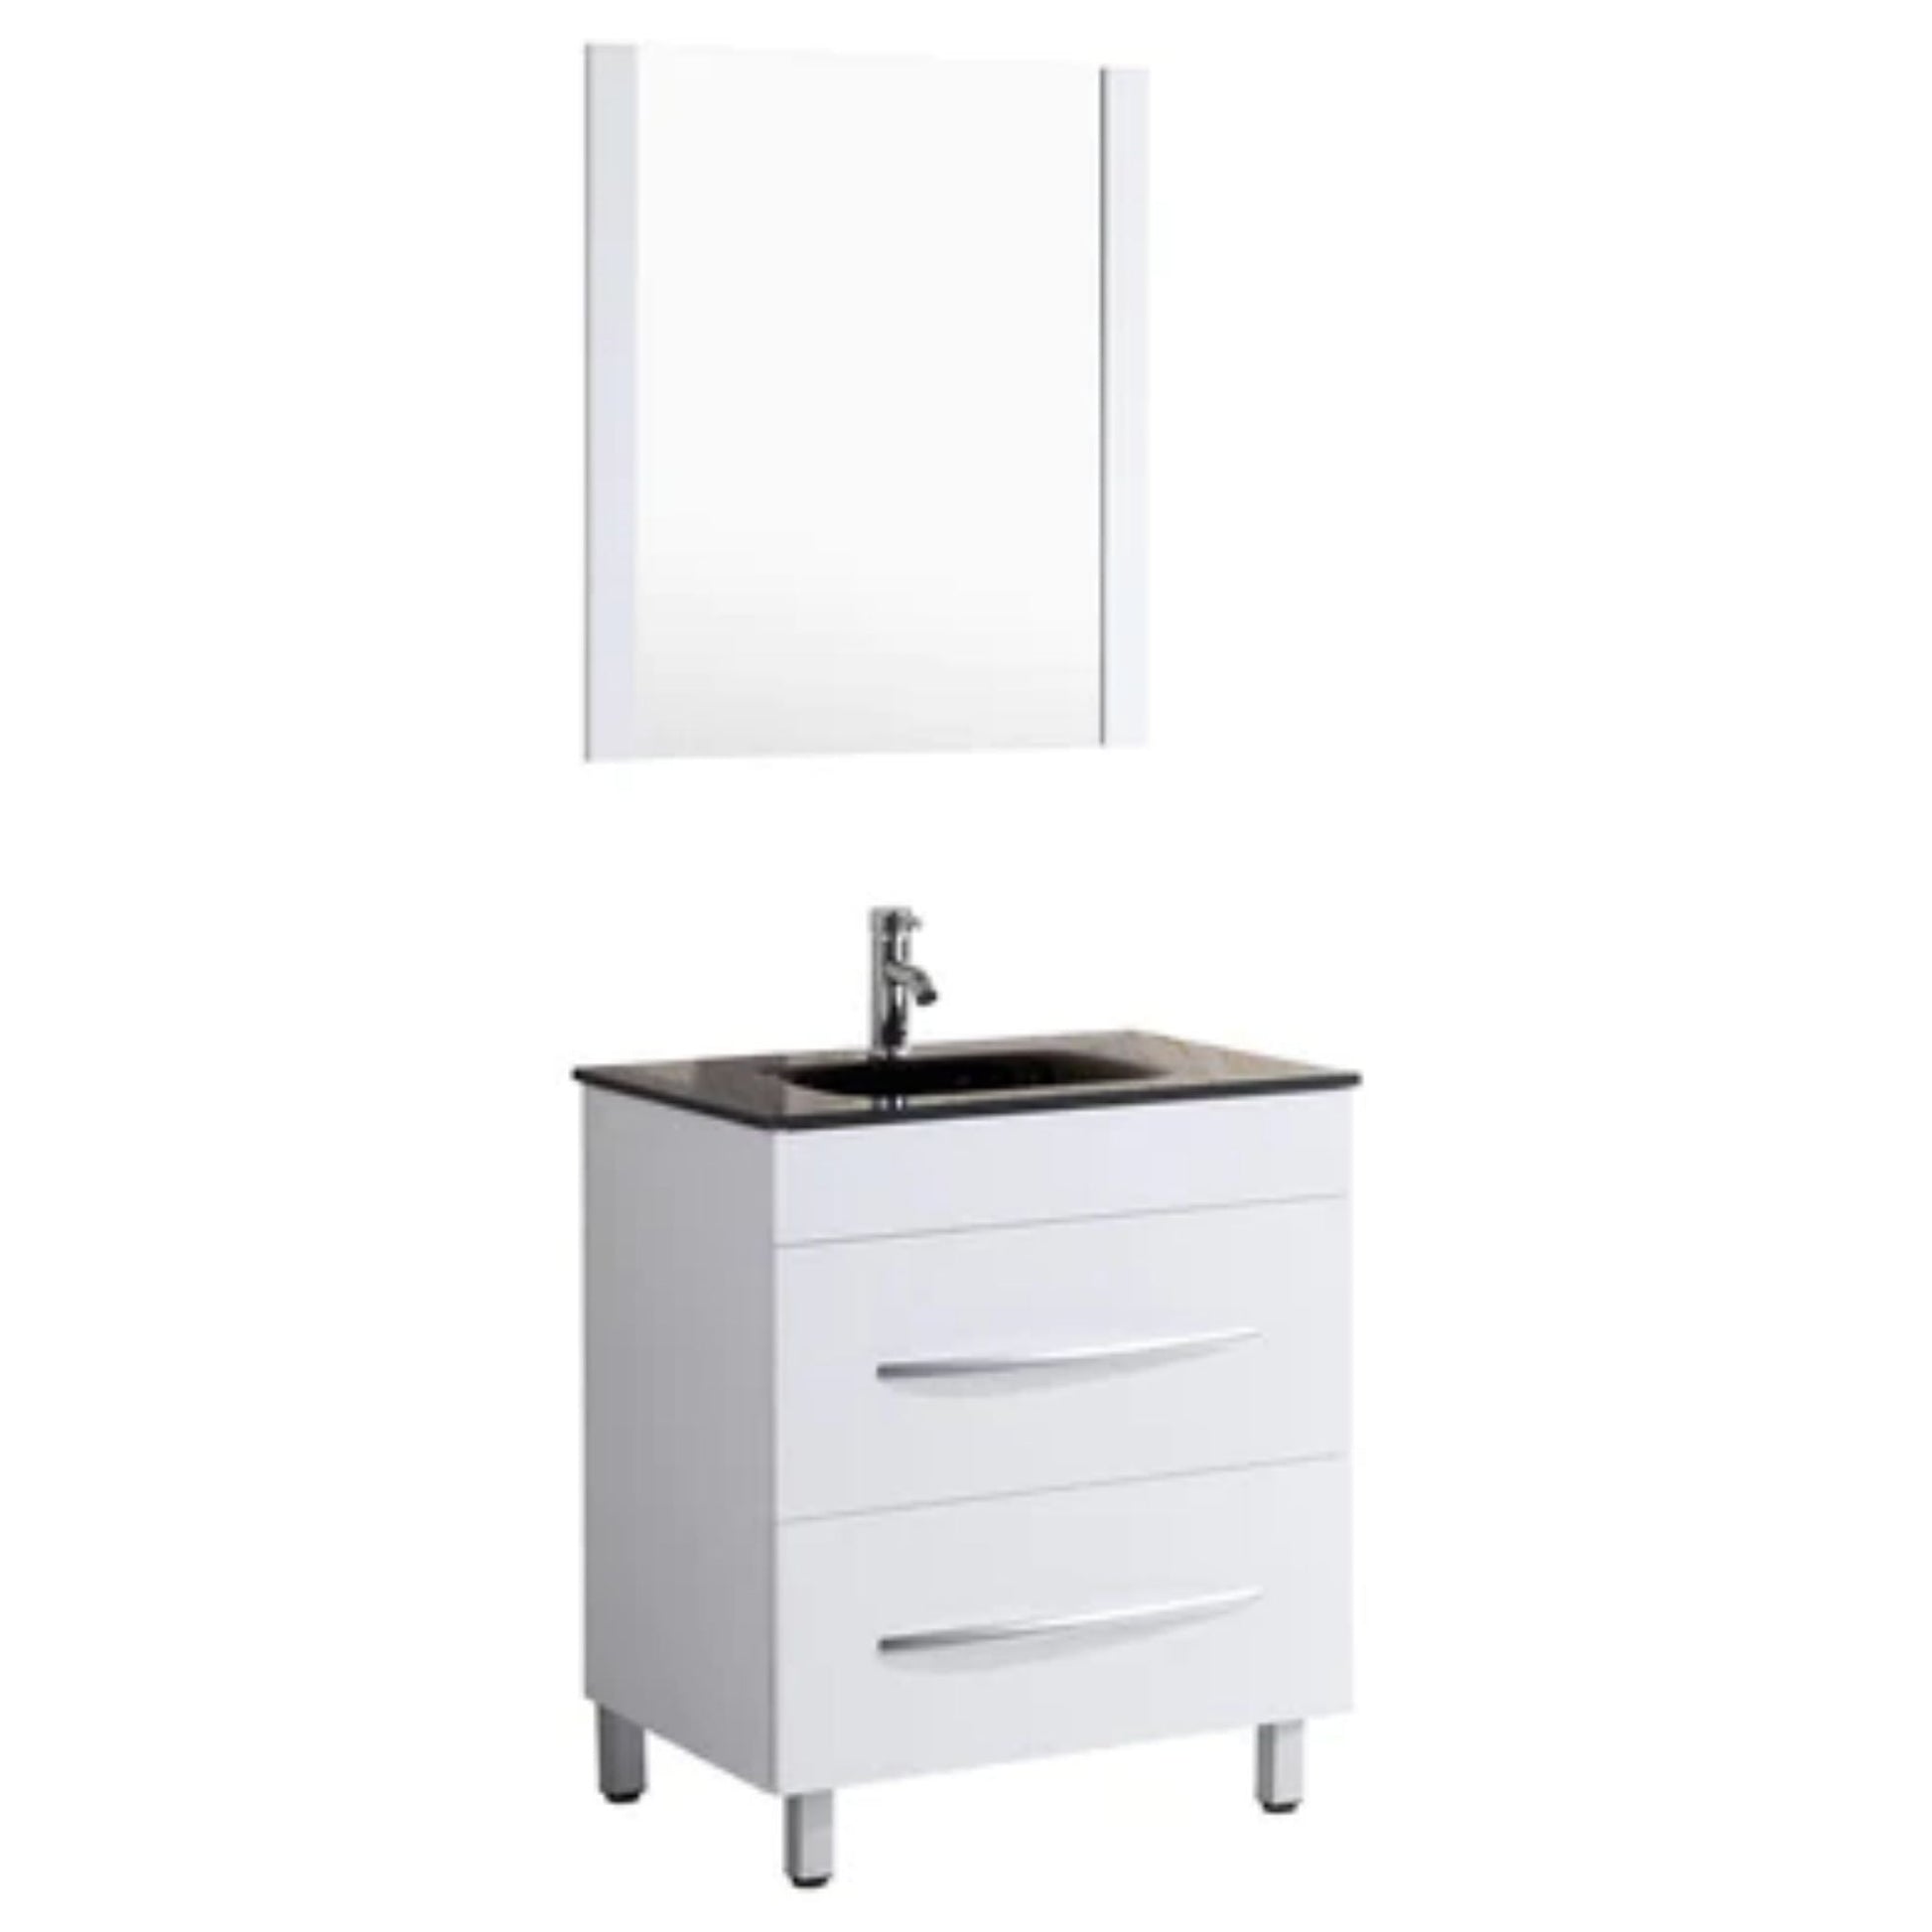 LessCare 30" White Vanity Sink Base Cabinet with Mirror - Style 4